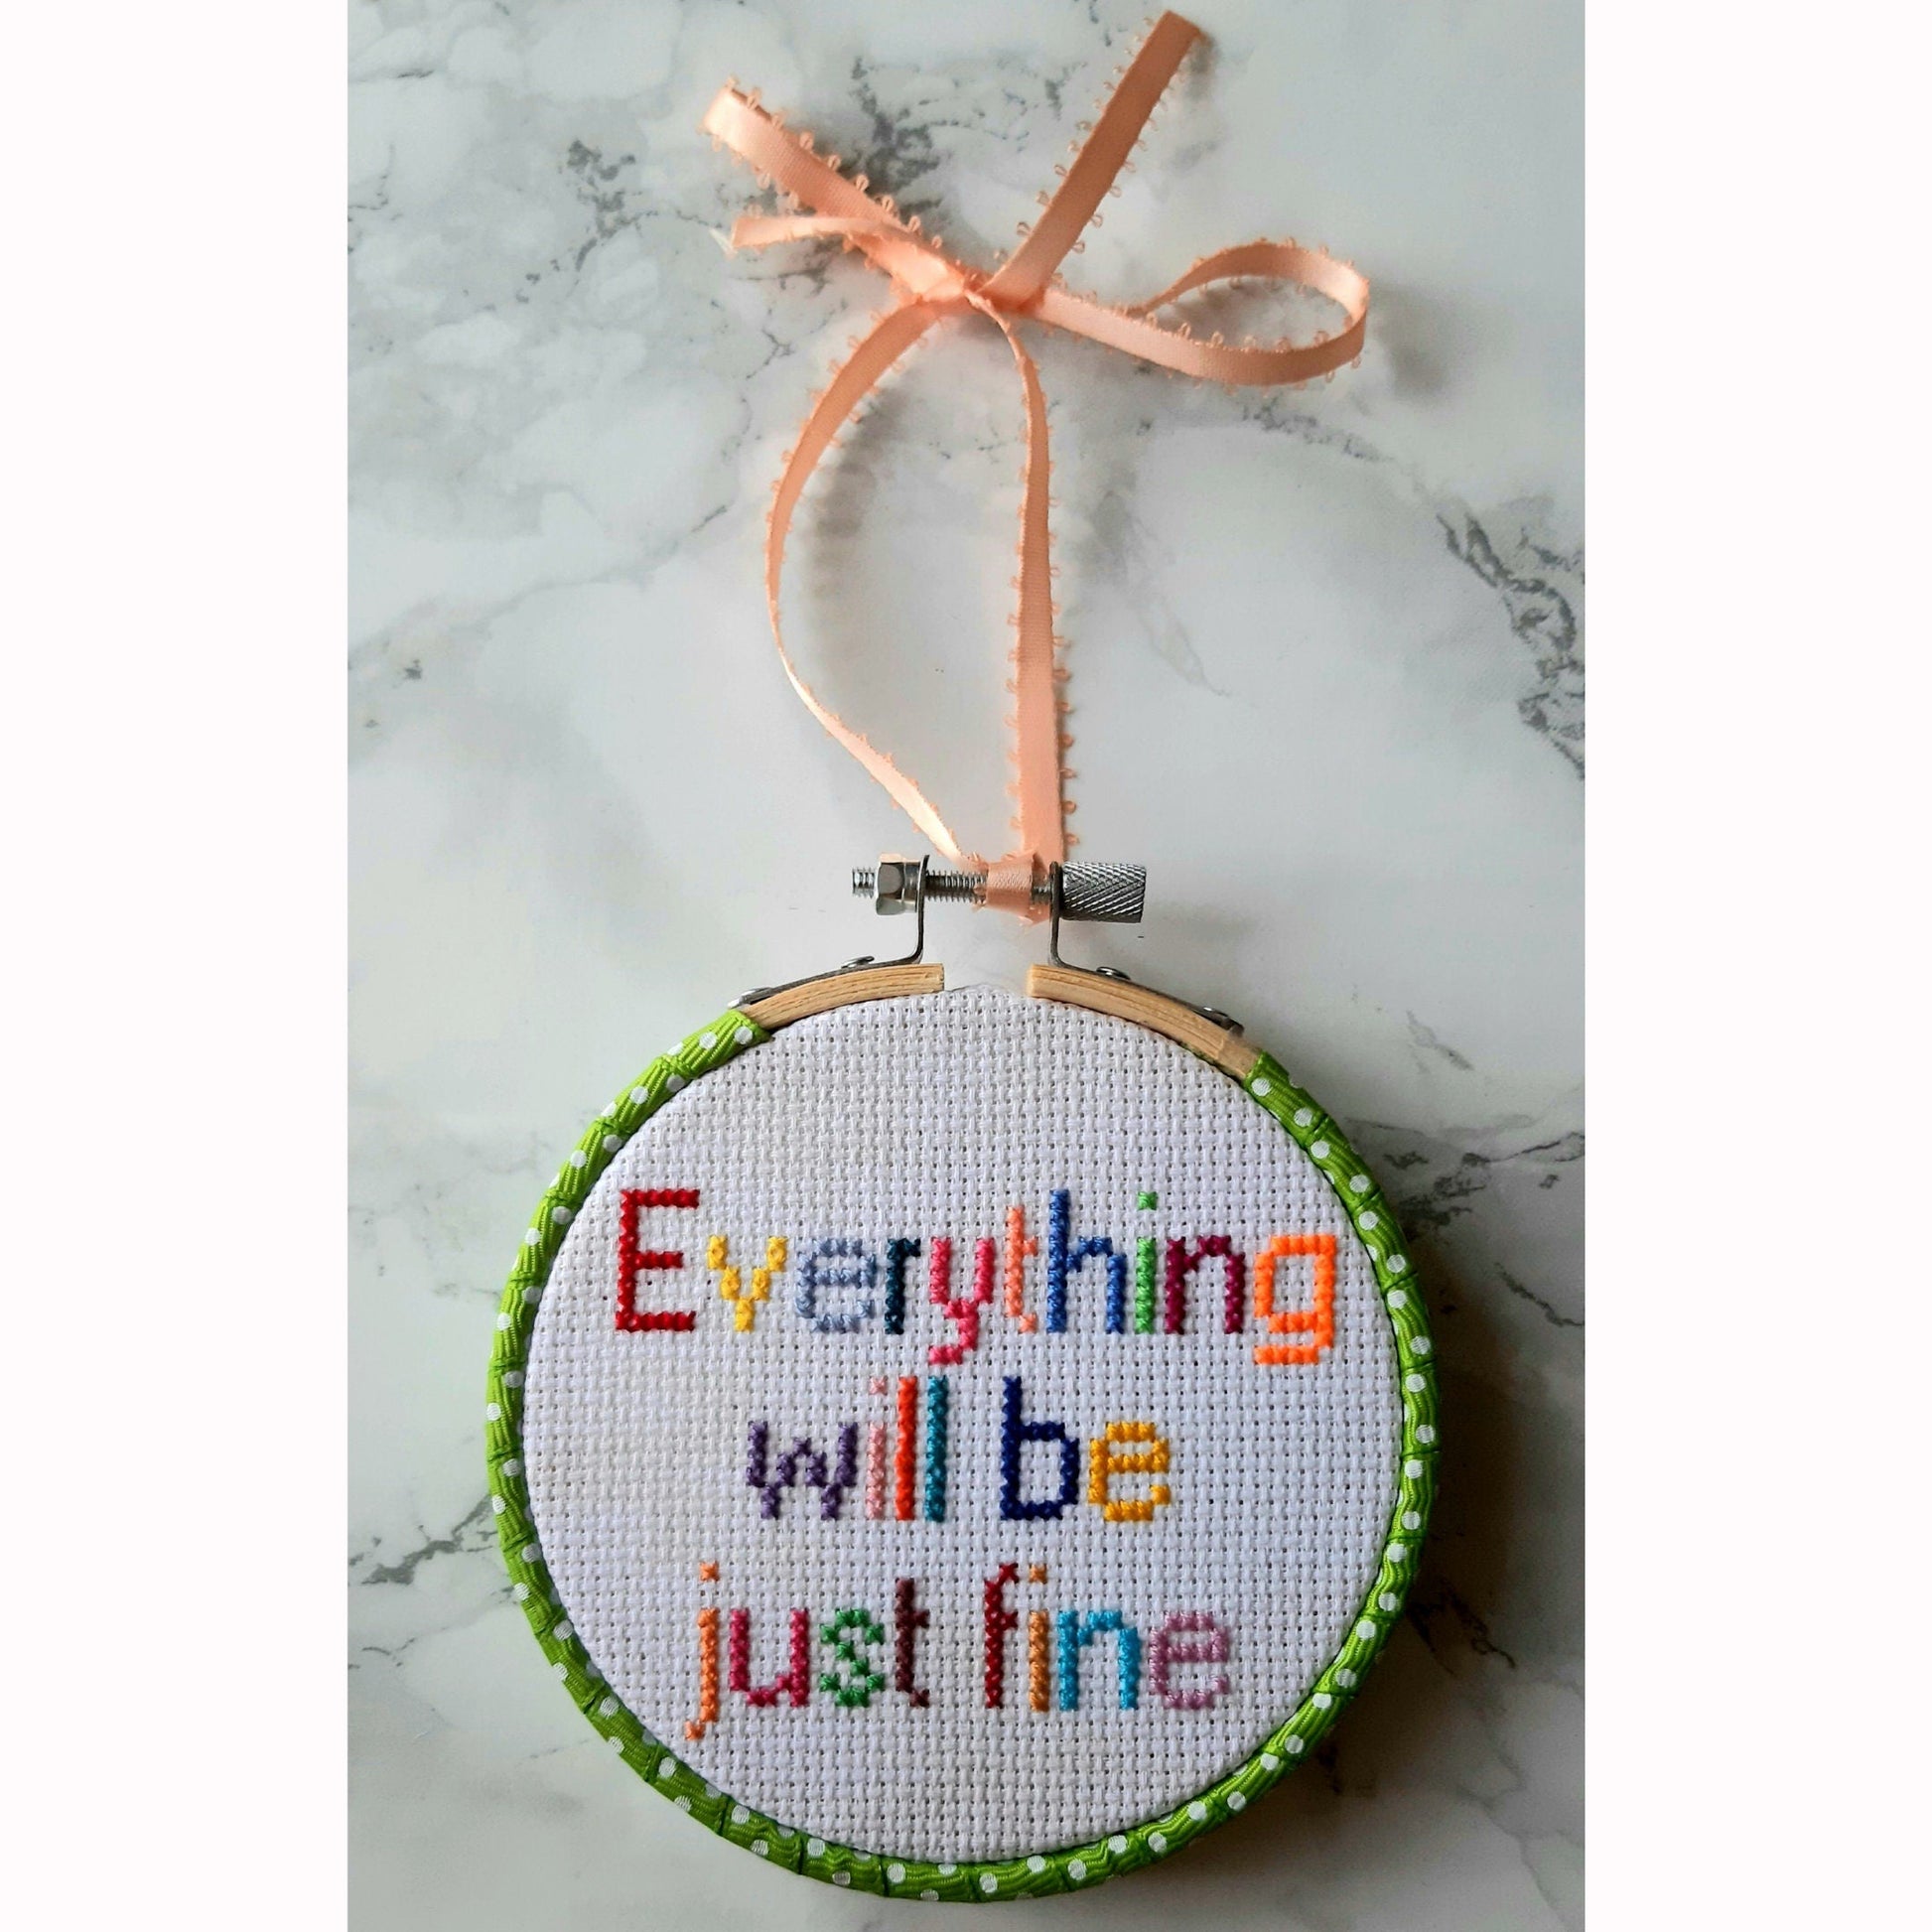 Everything will be just fine, completed cross stitch quote - Thistleflat Crafts